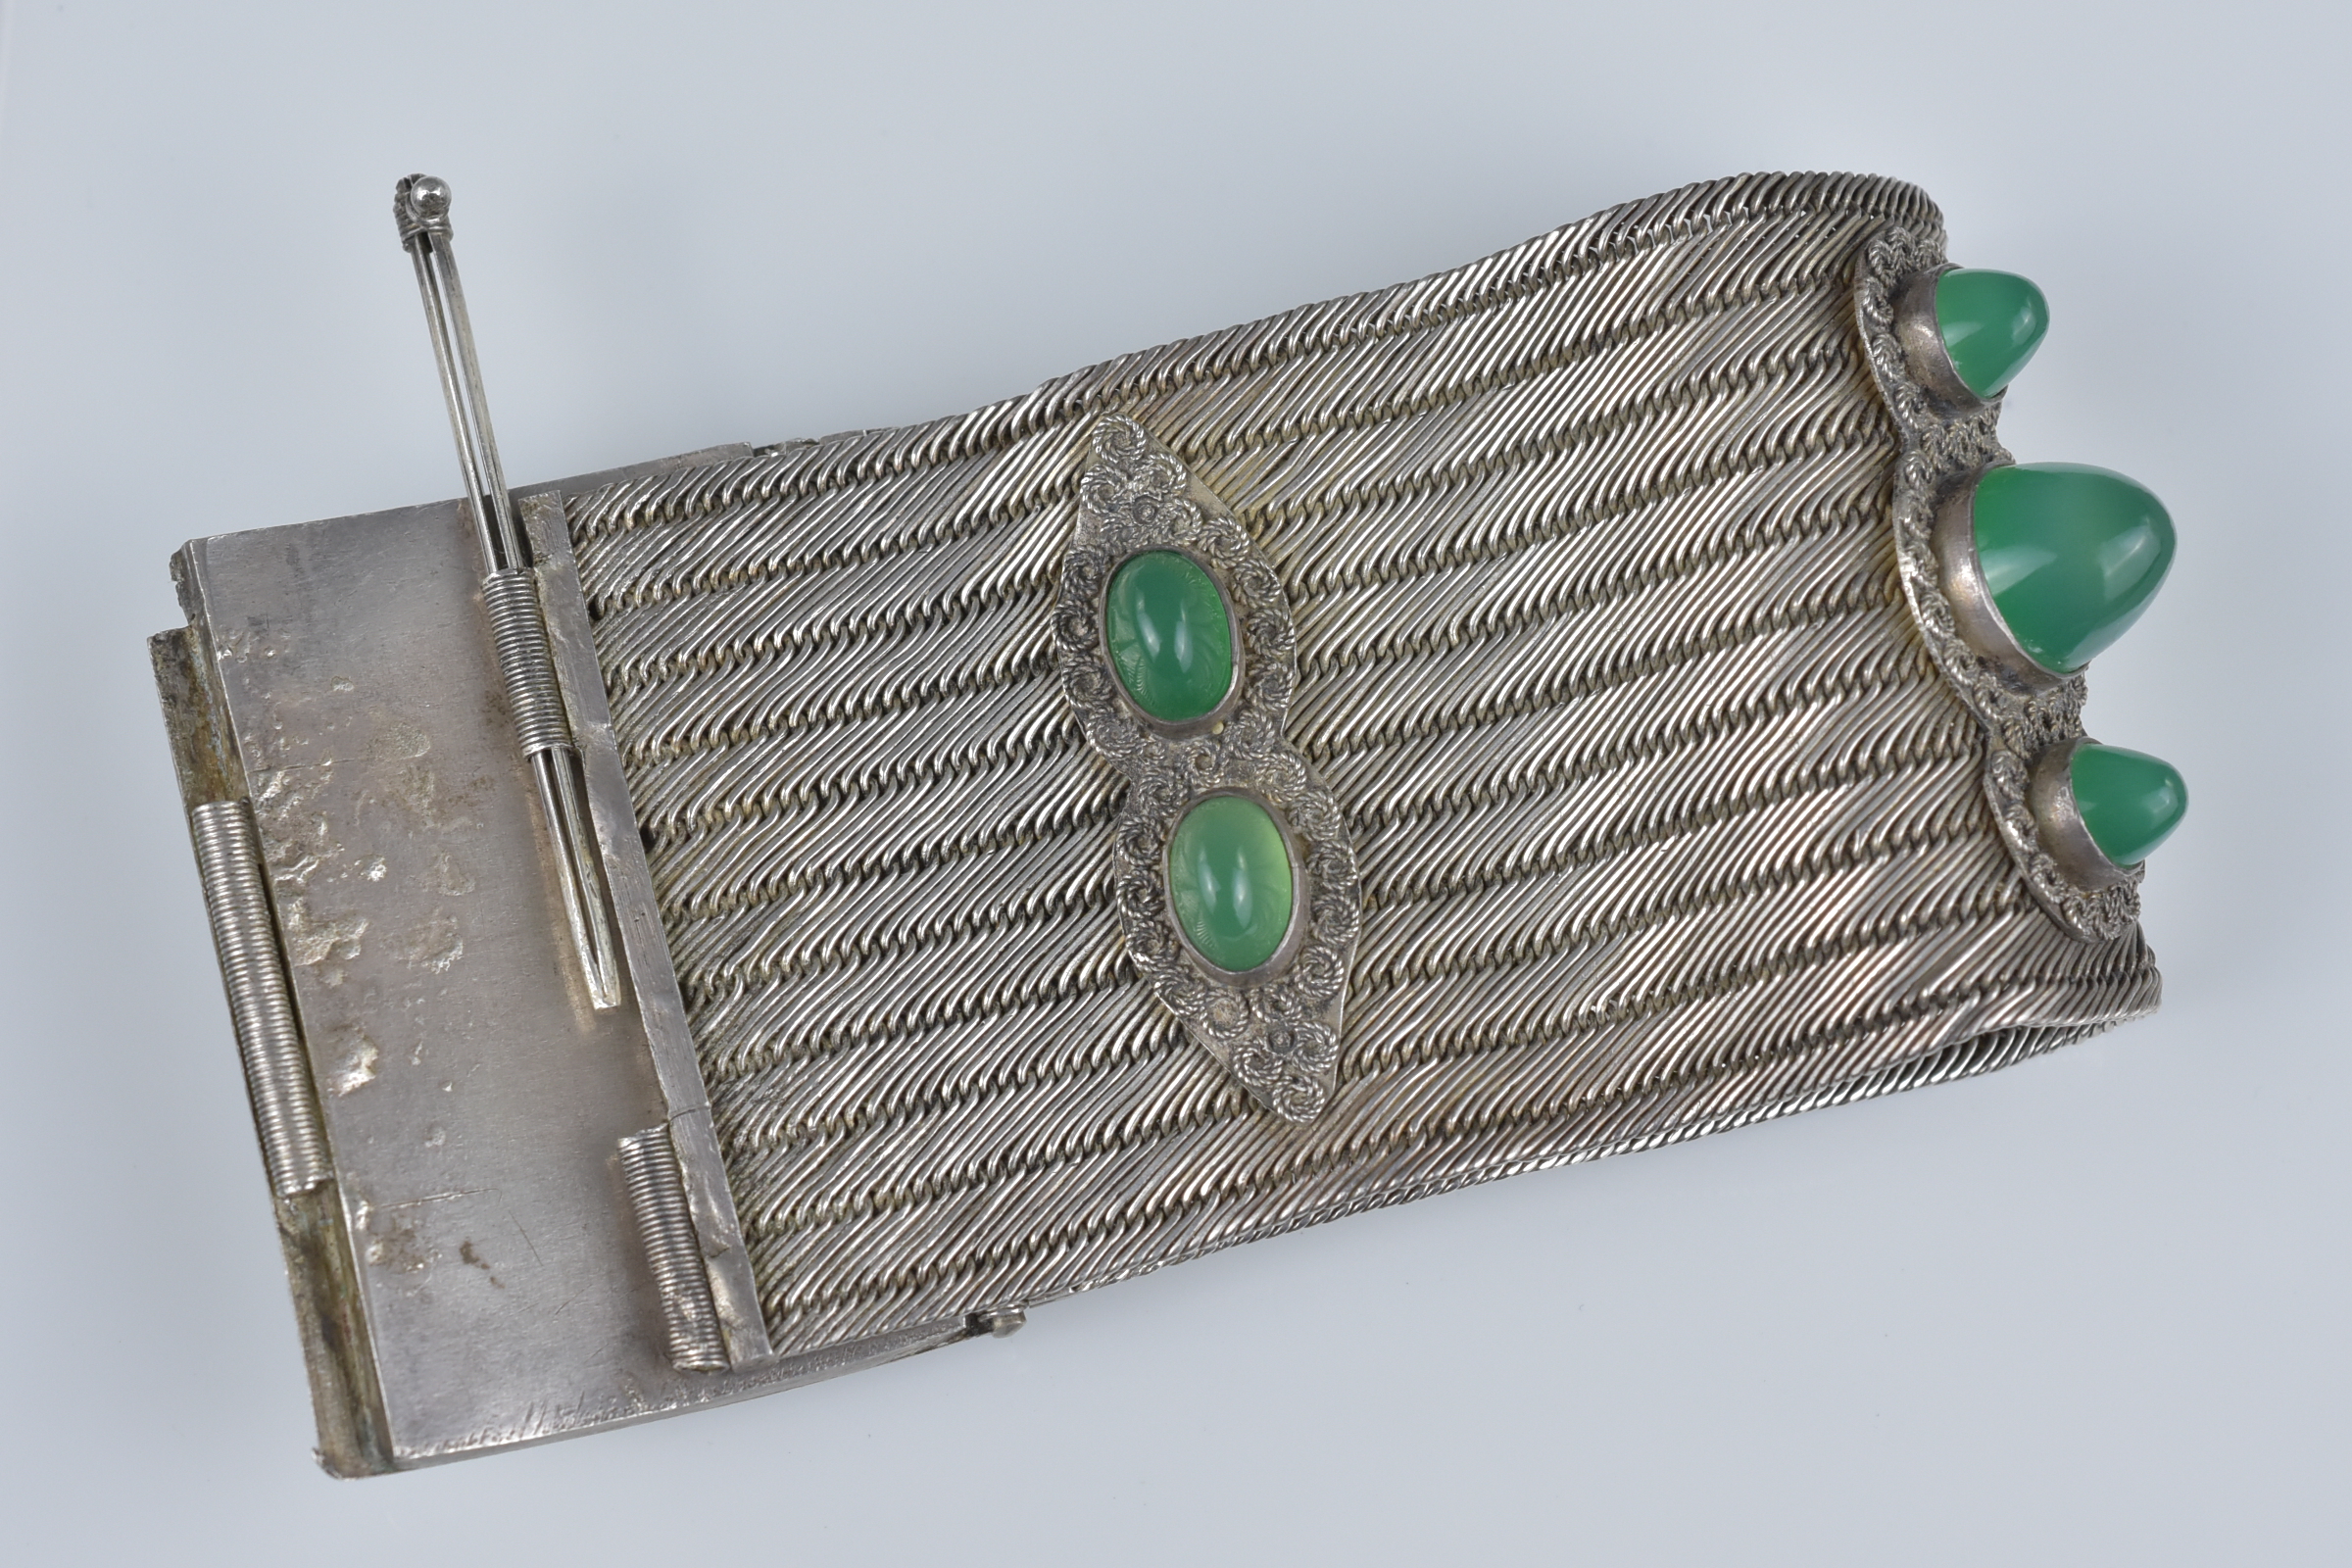 An antique silver metal and chrysoprase cuff bracelet - Image 4 of 5